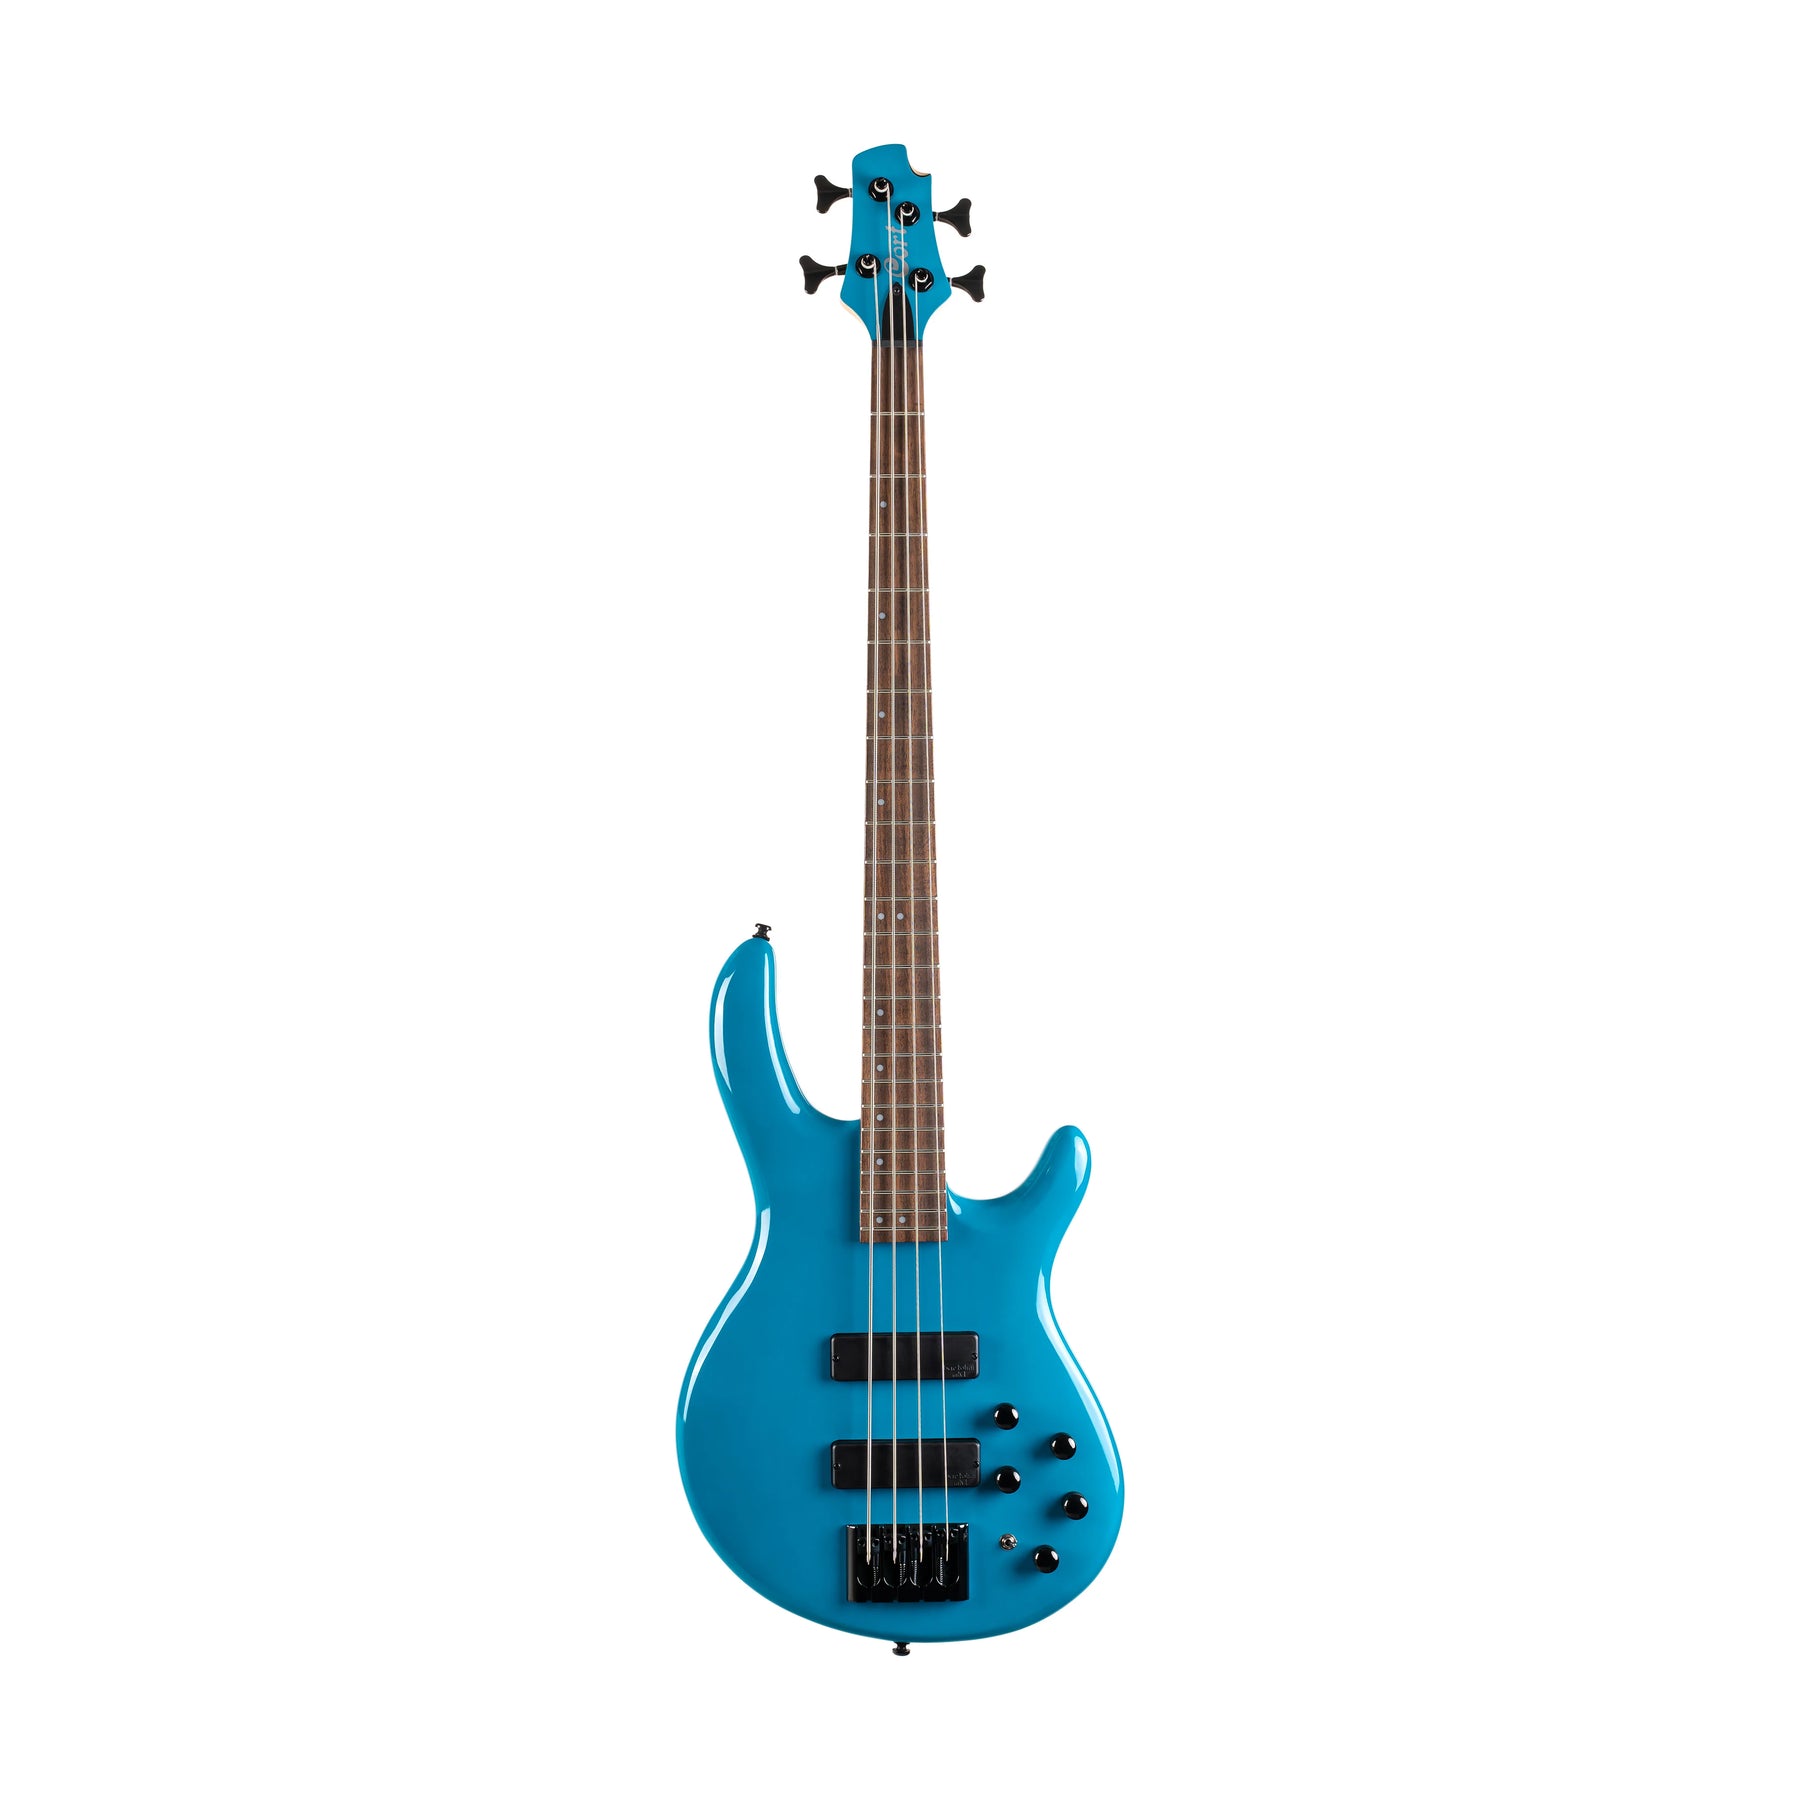 Cort C4 Deluxe Bass Guitar - Candy Blue